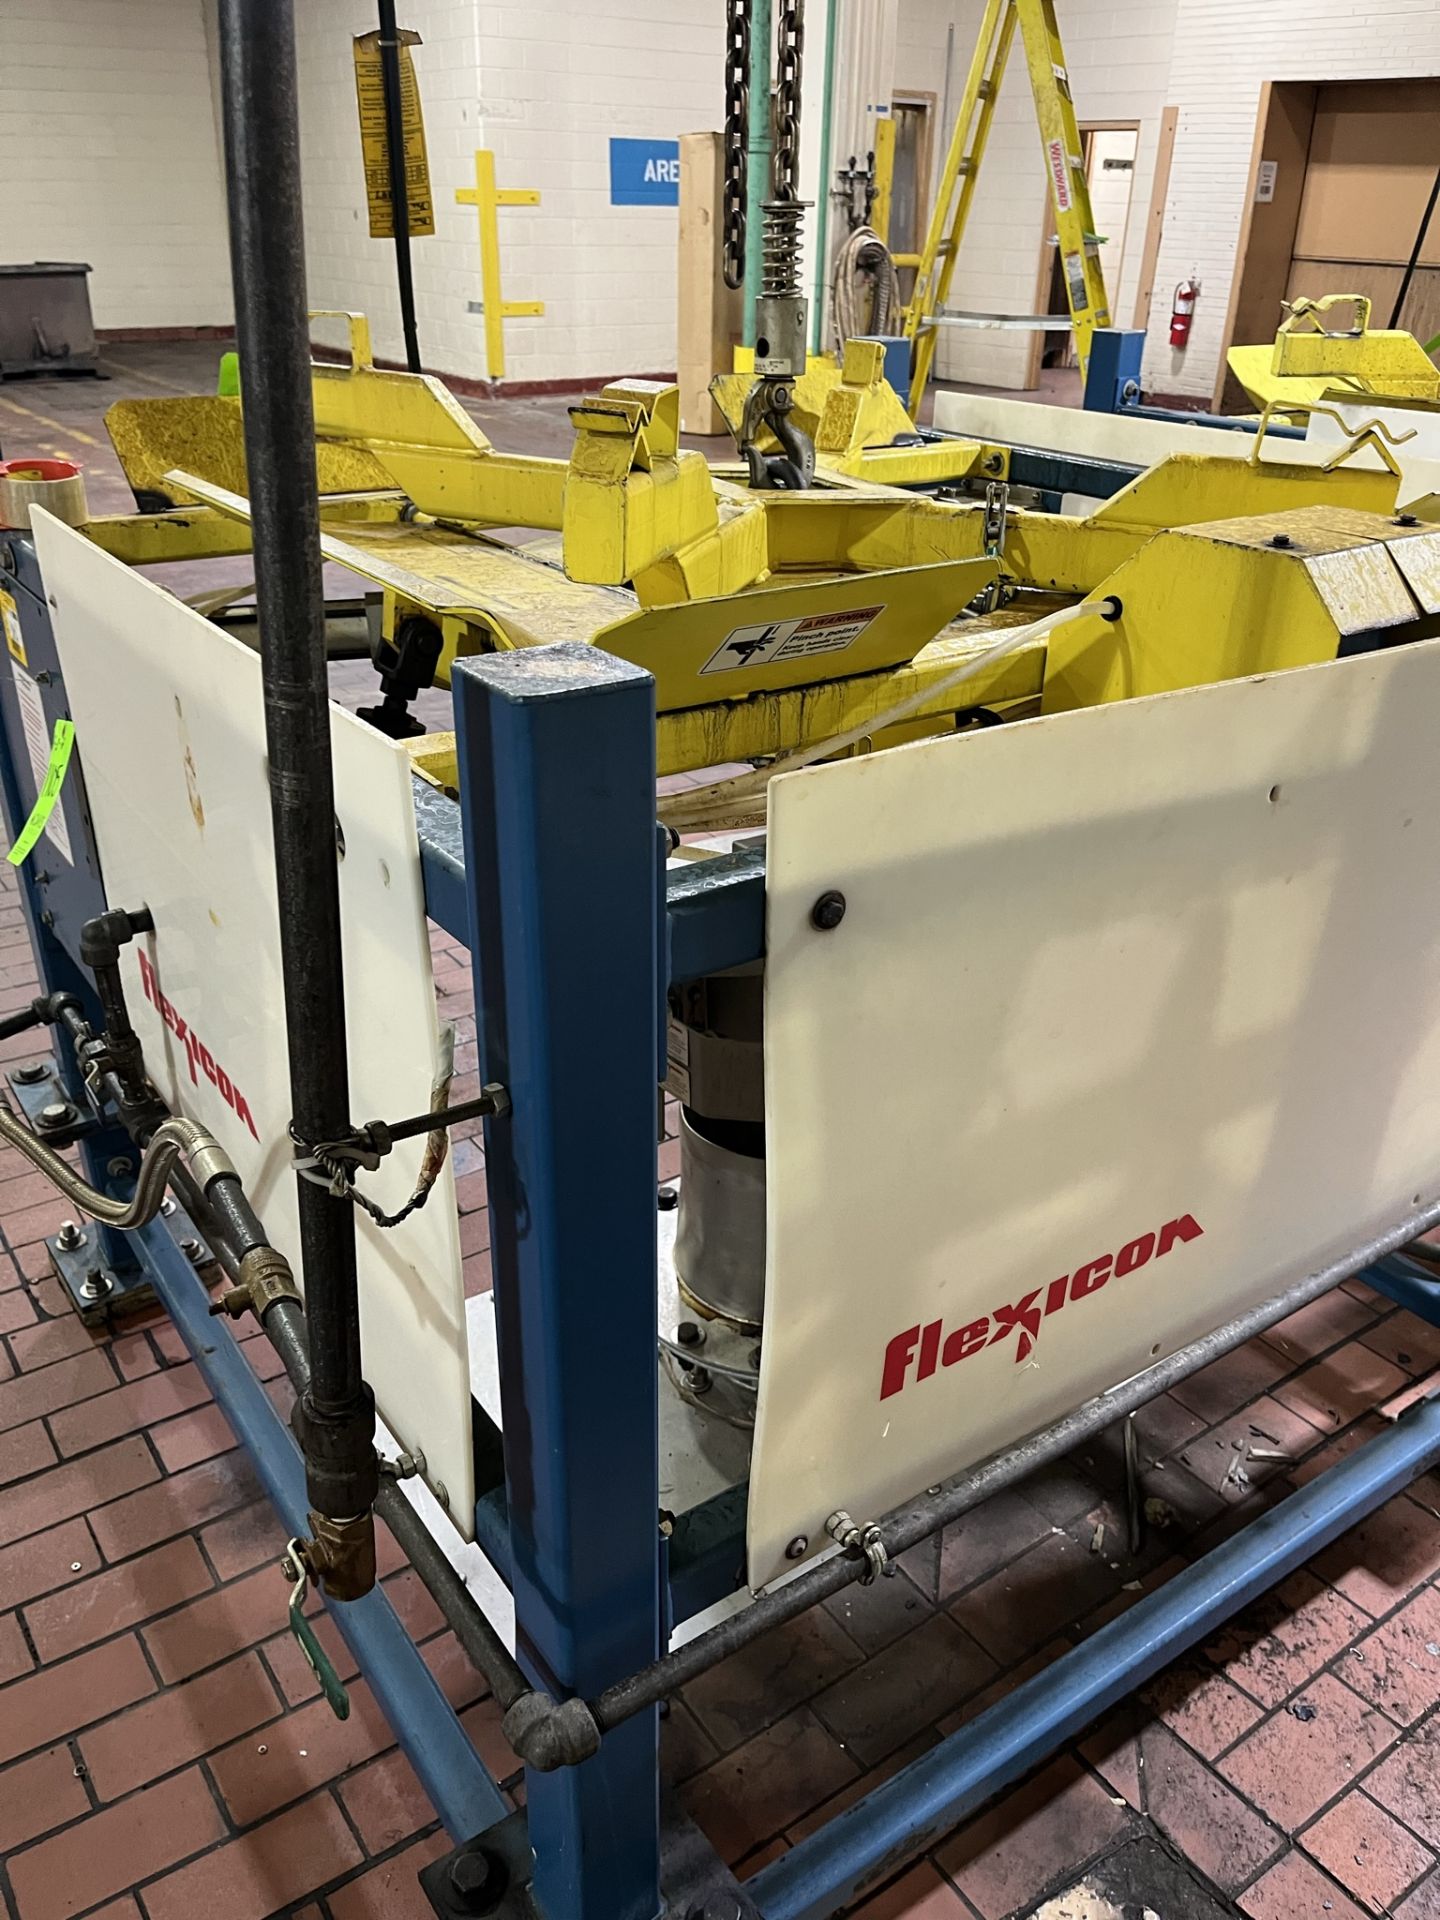 FLEXICON SUPERSAC UNLOADER, BULK BAG DISCHARGER 2700 LBS MAX LOAD, INCLUDES I-BEAM WITH ELECTRIC - Image 3 of 10